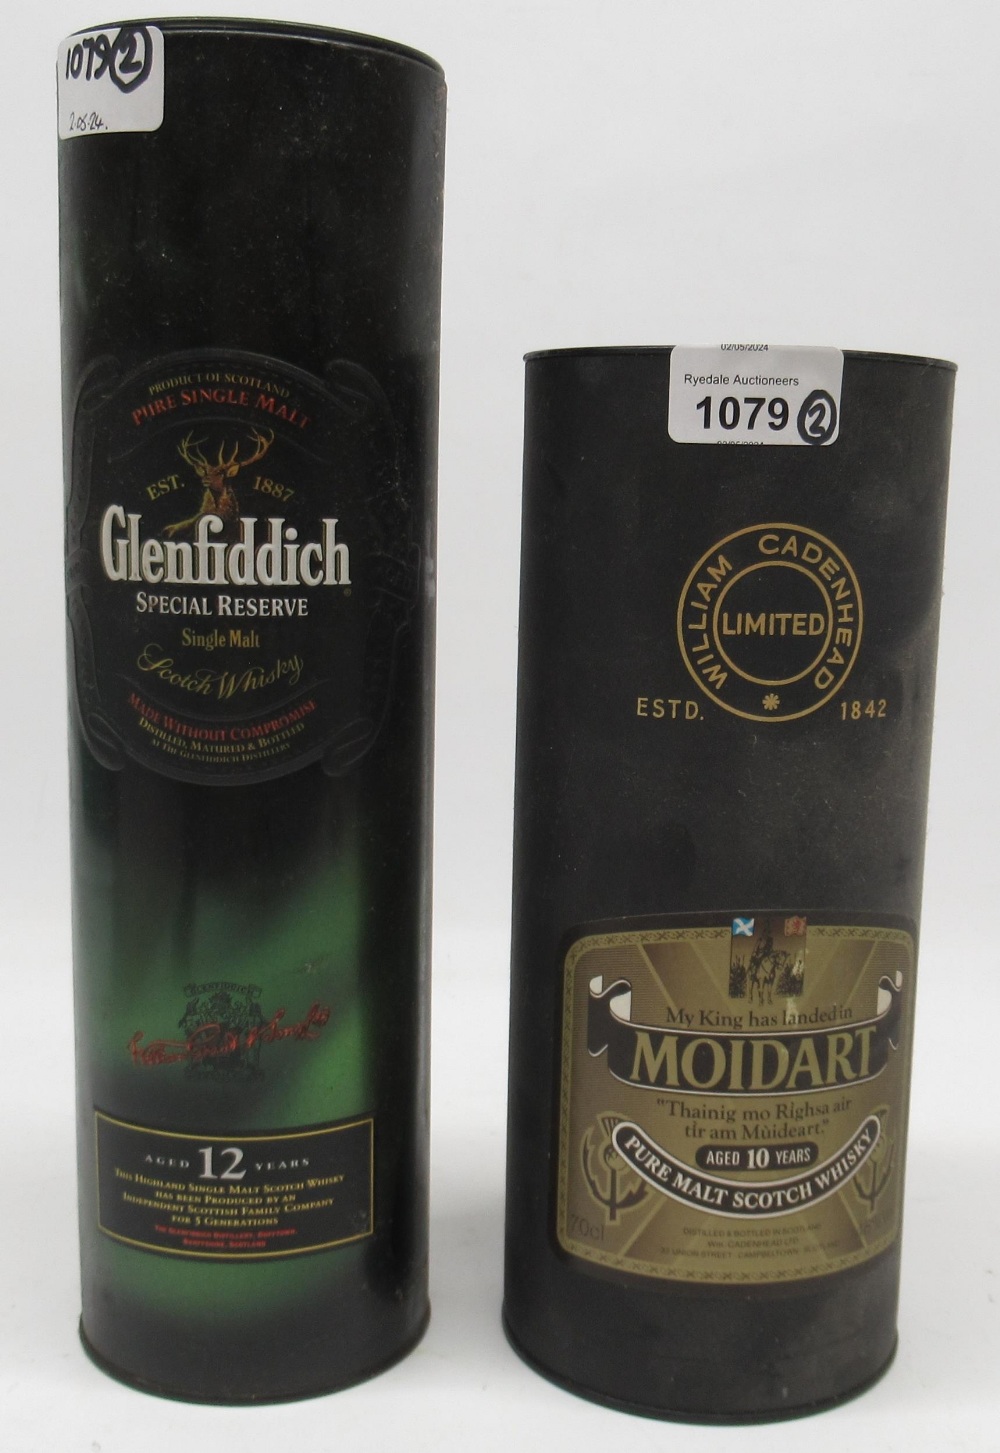 William Cadenhead Ltd., Moidart aged 10 years, pure malt whisky, 46%, 70cl bottle and The - Image 2 of 2